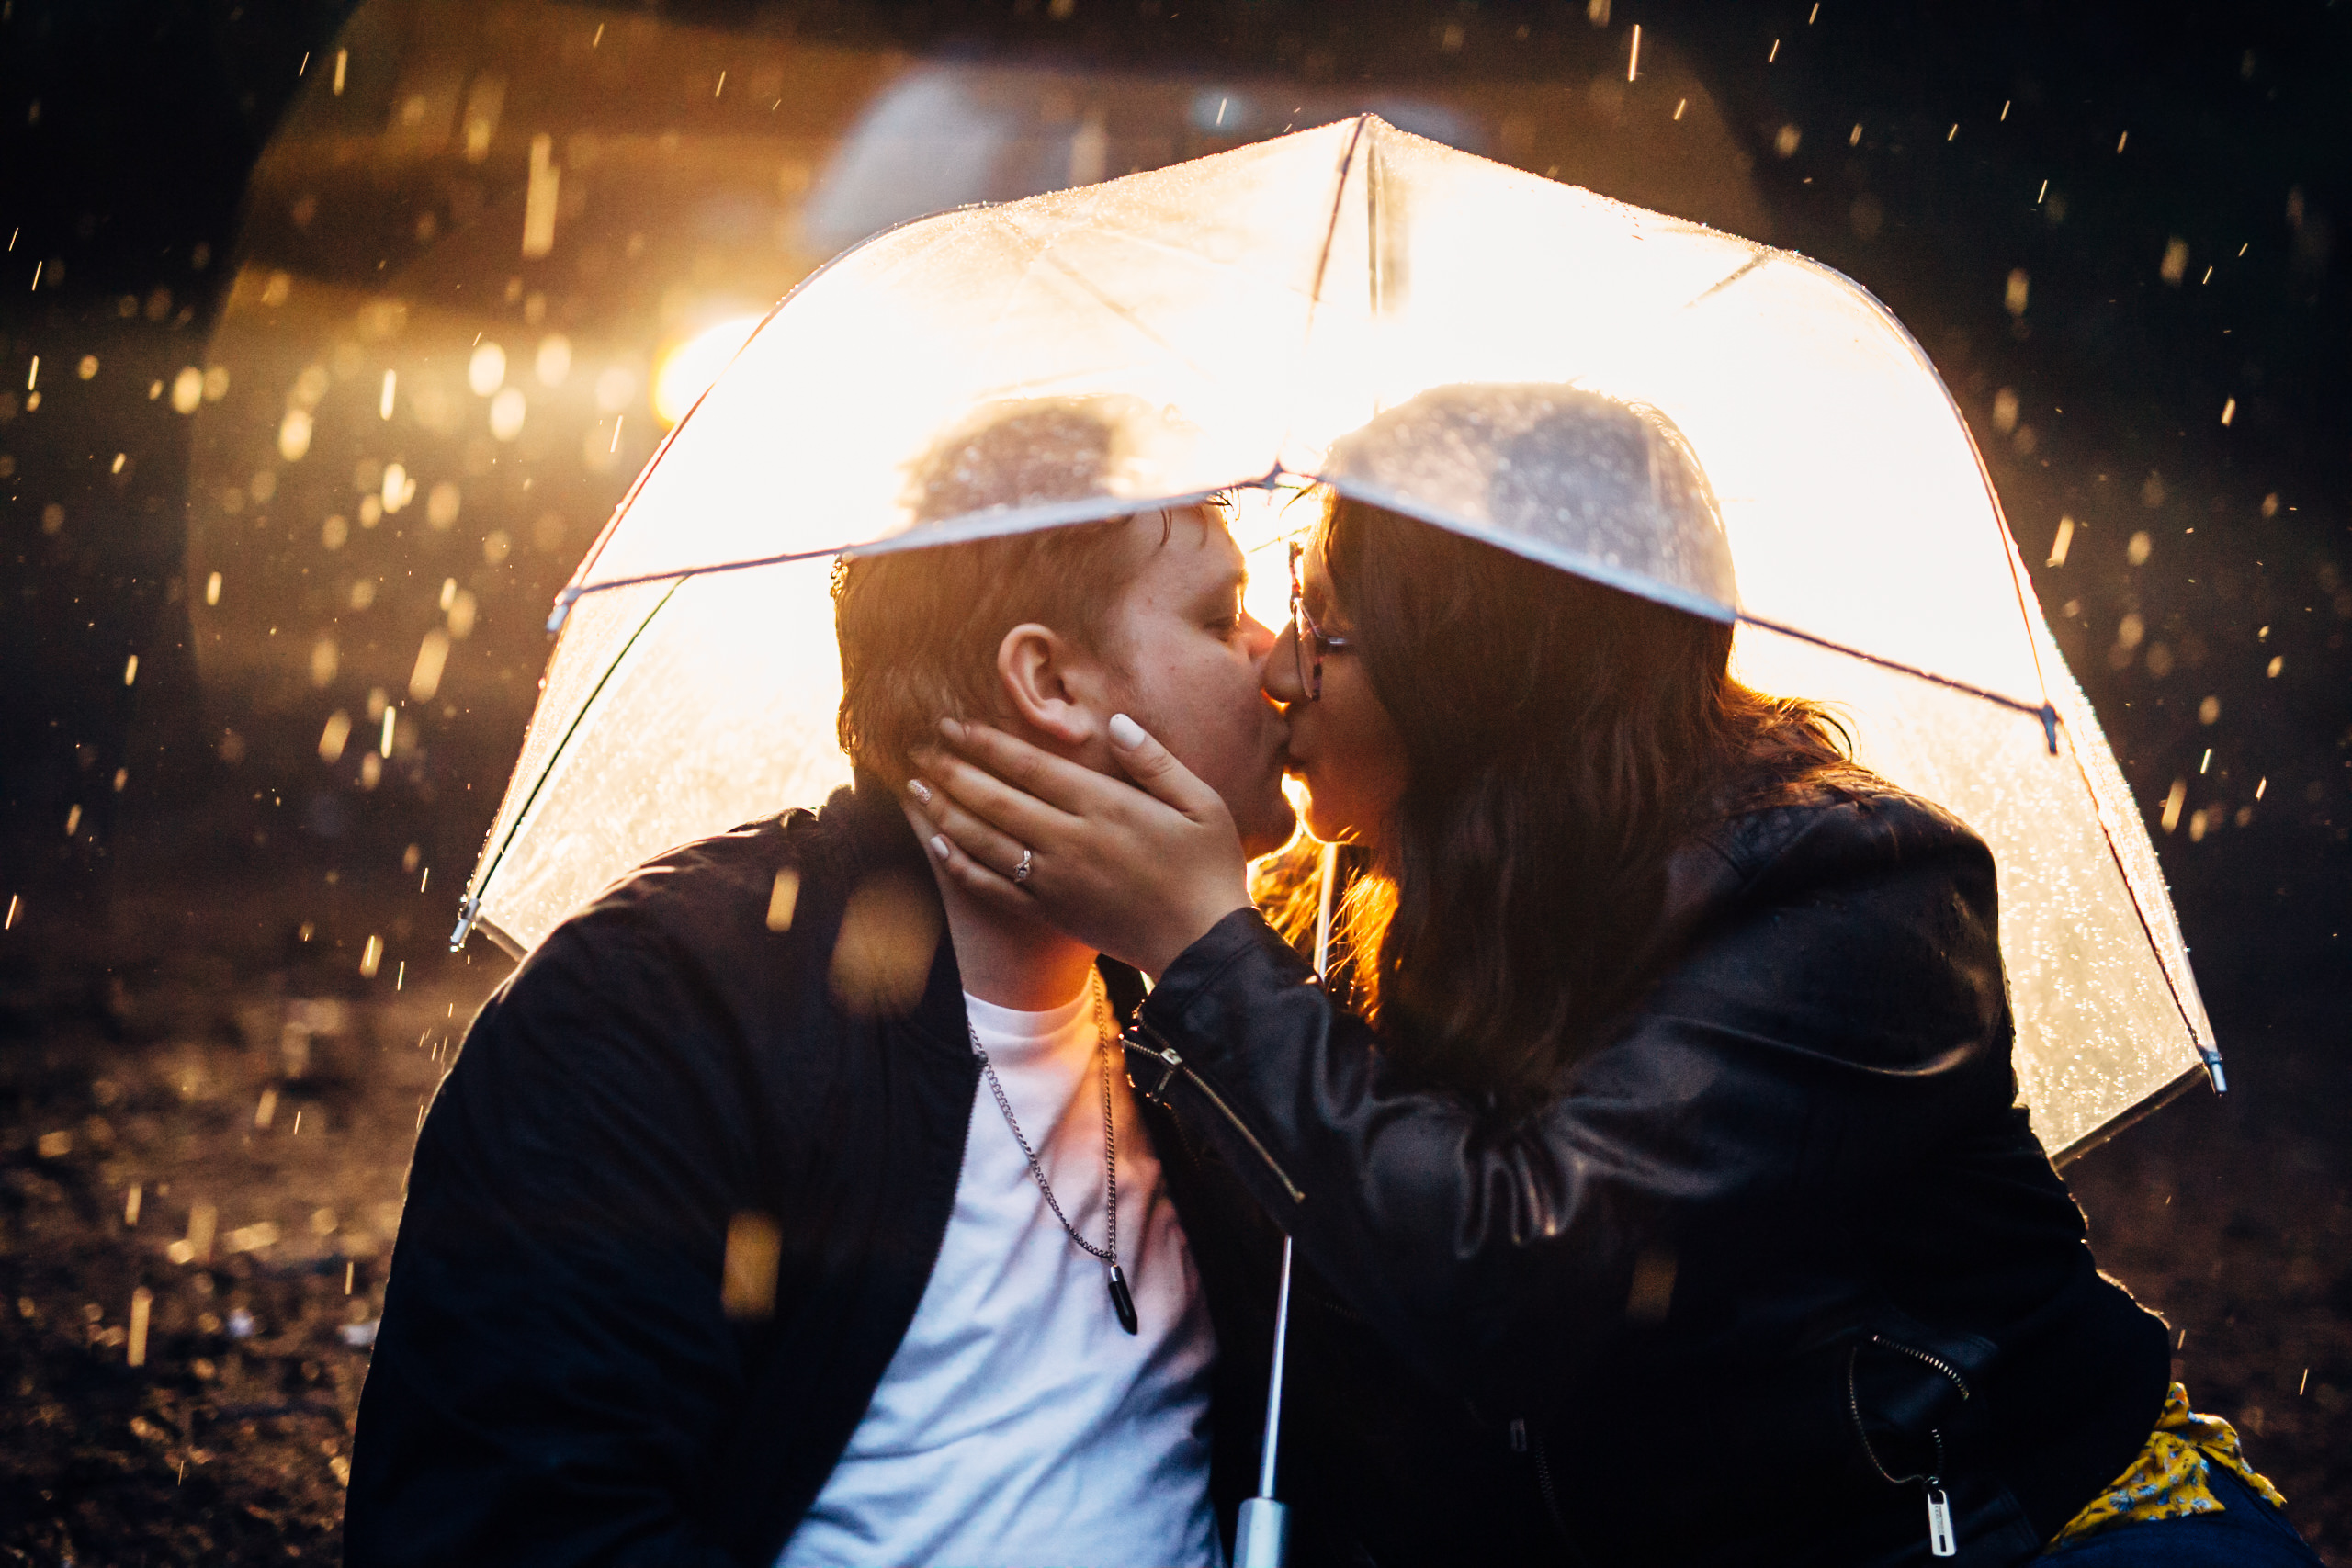 griffith observatory engagement photos Couple kissing underneath umbrella at night with rainfall.